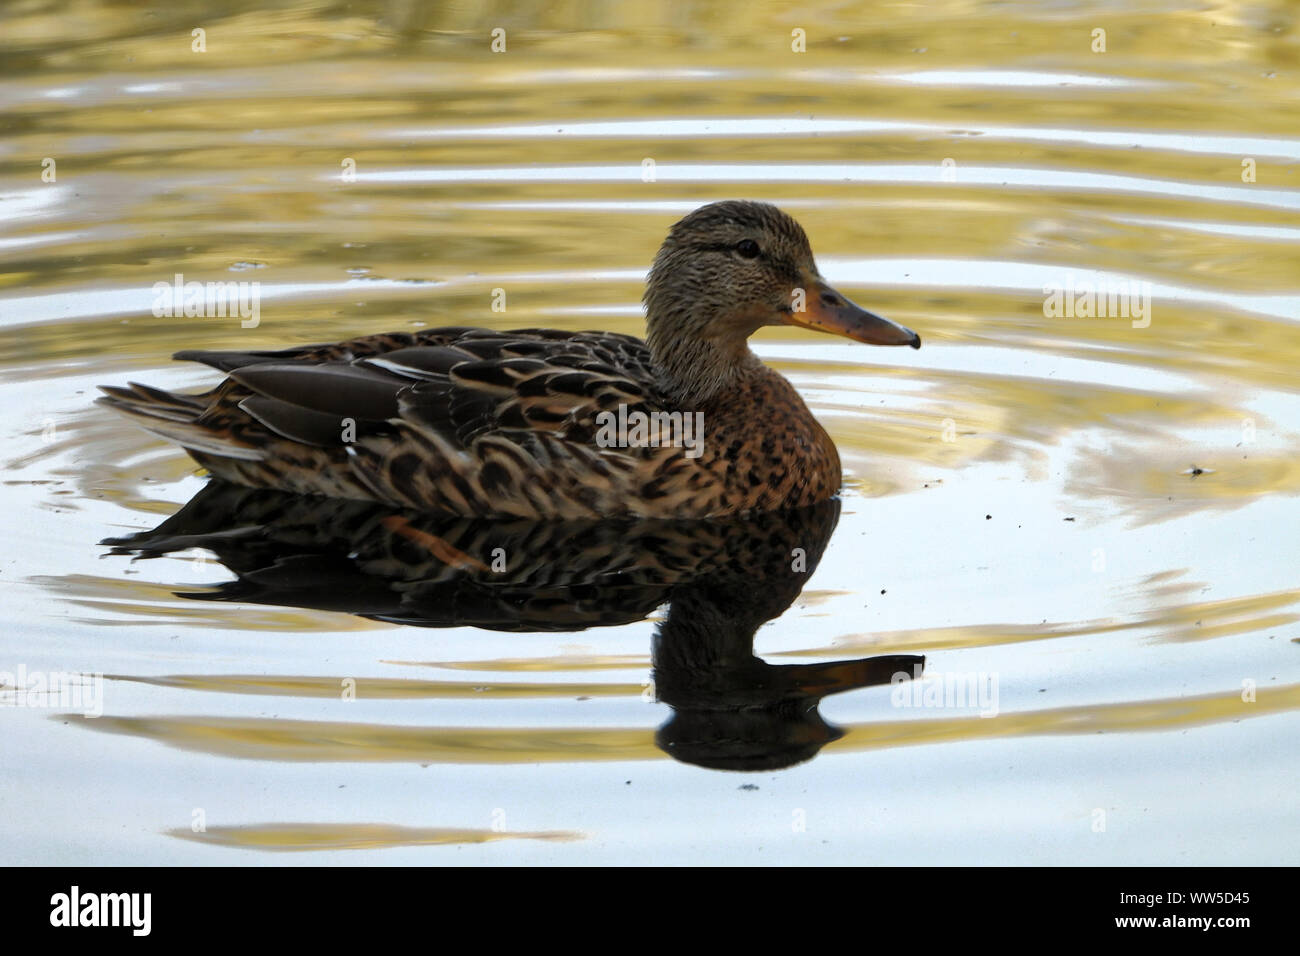 The mallard (Anas platyrhynchos) is a dabbling duck that breeds throughout the temperate and subtropical Americas, Eurasia, and North Africa. Stock Photo